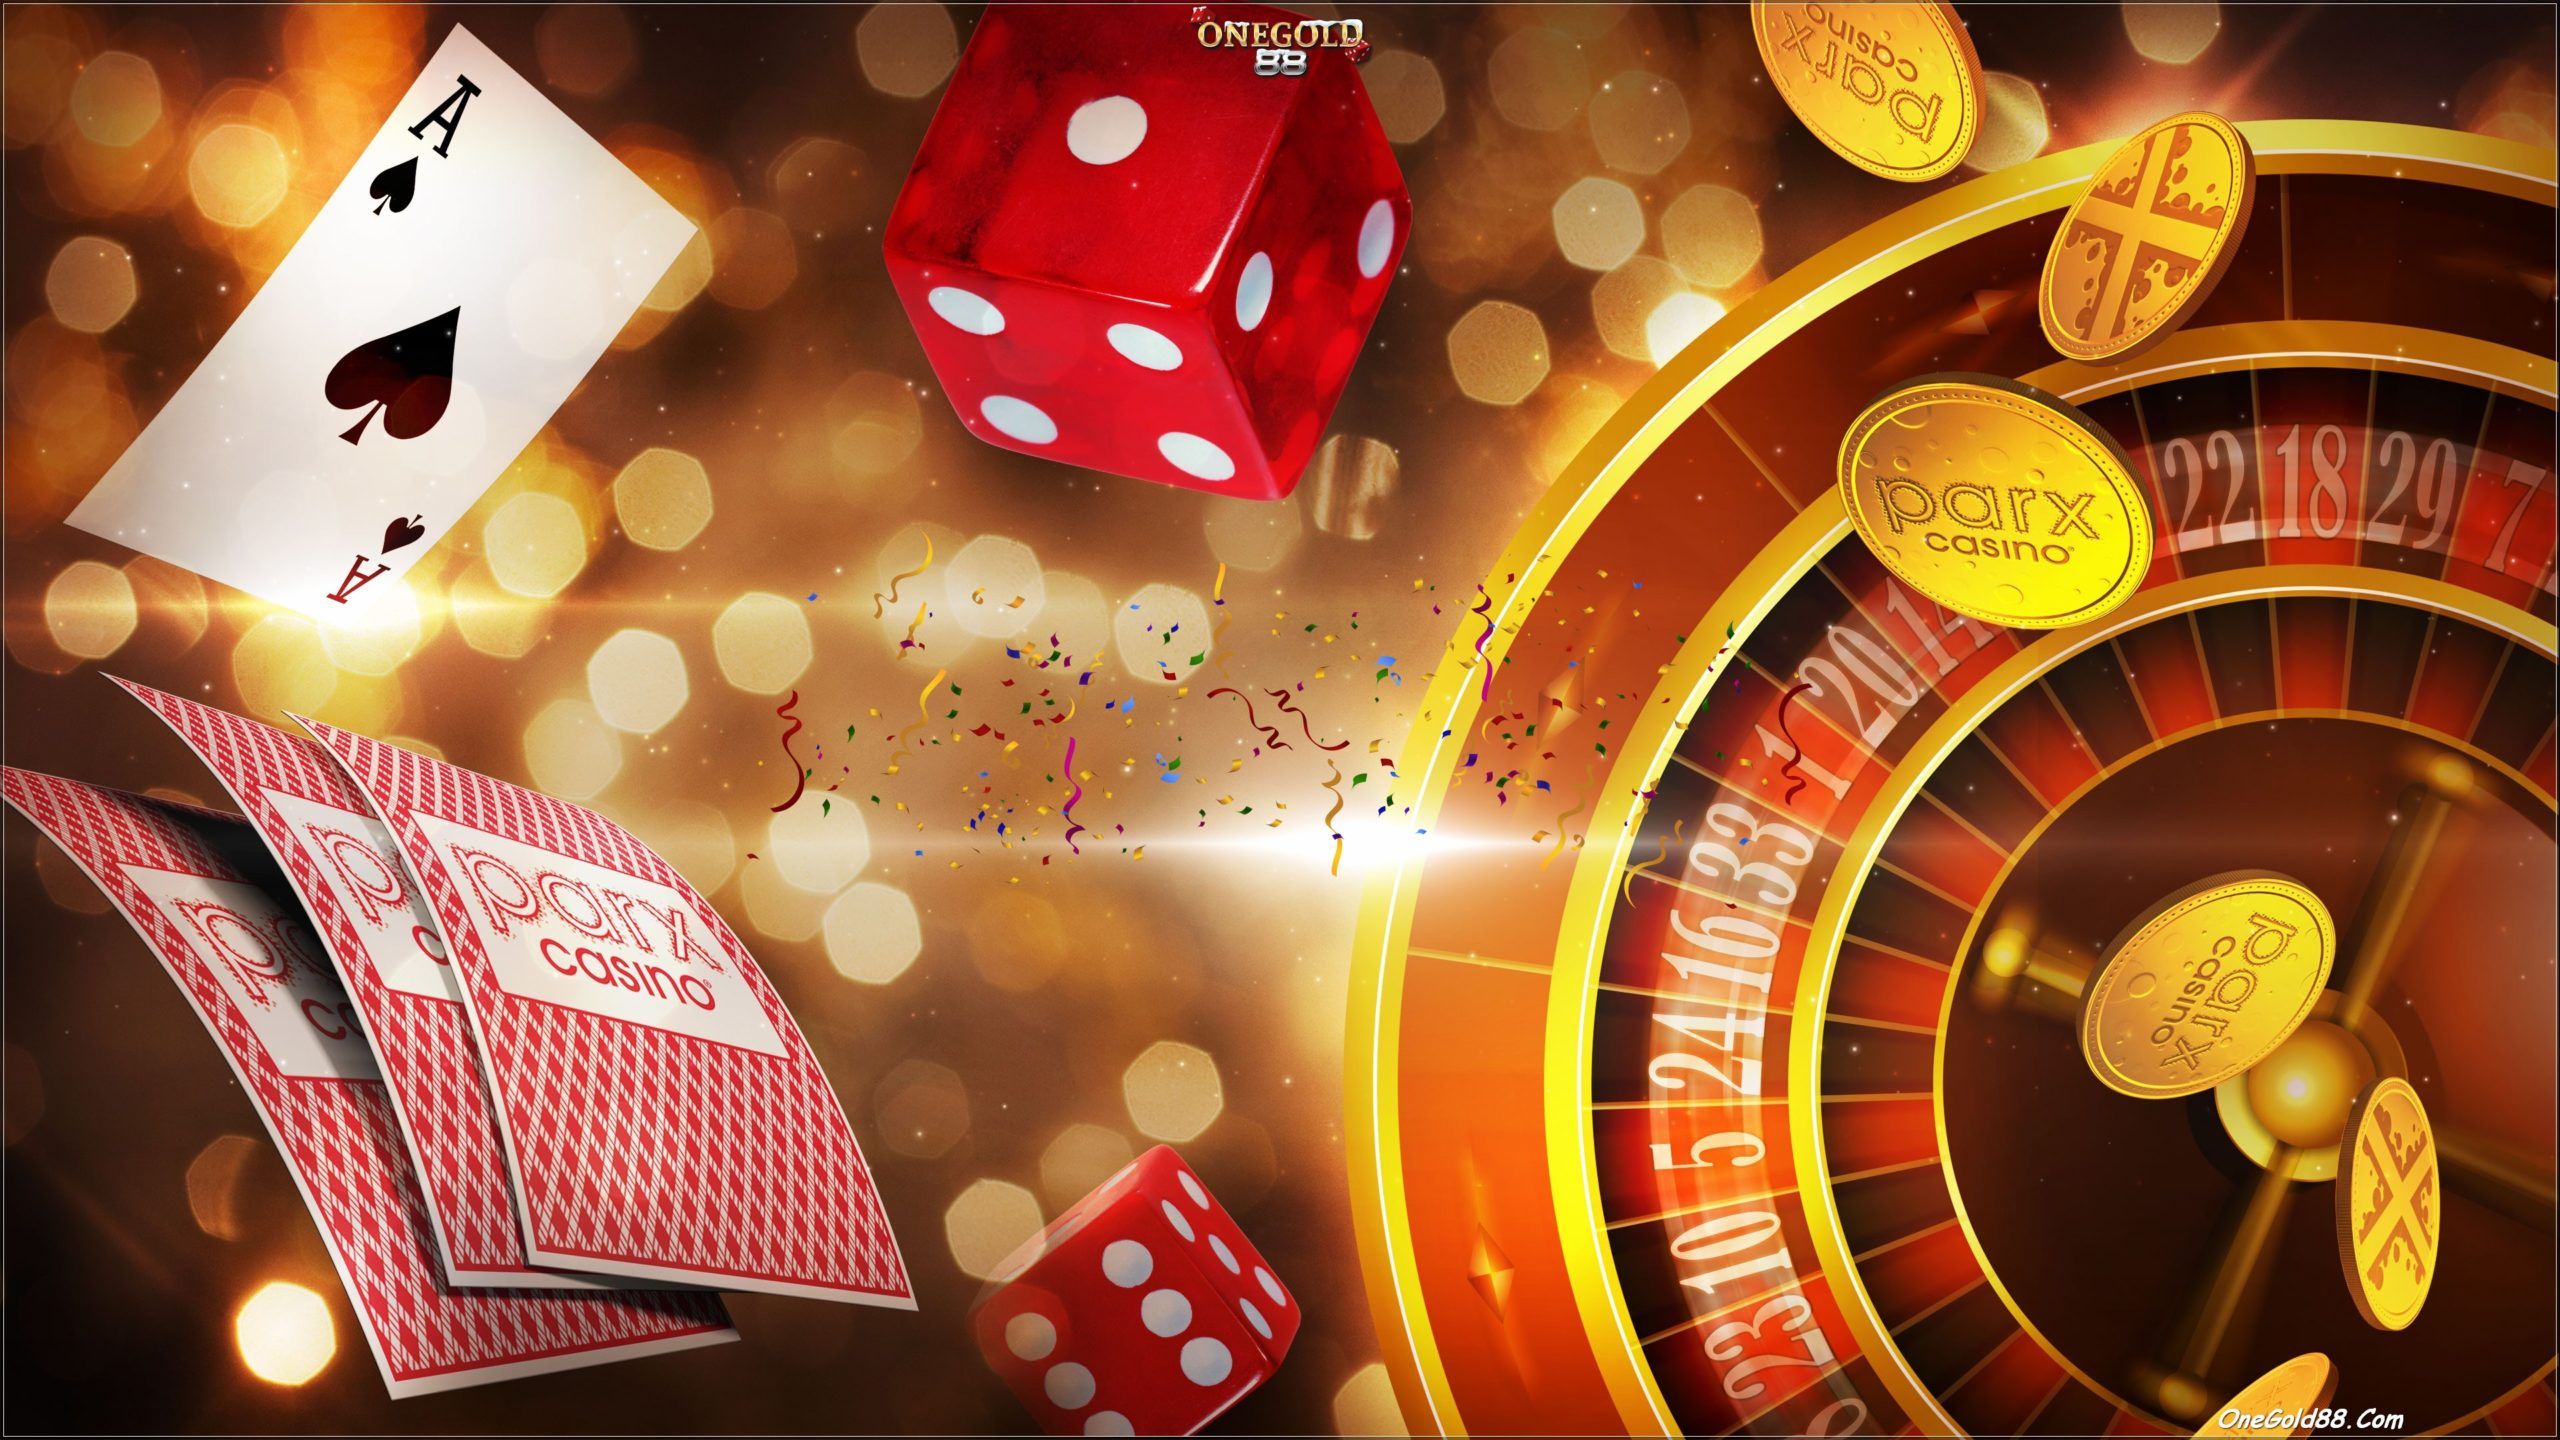 Discover the Latest web slots with High Volatility and Huge Wins